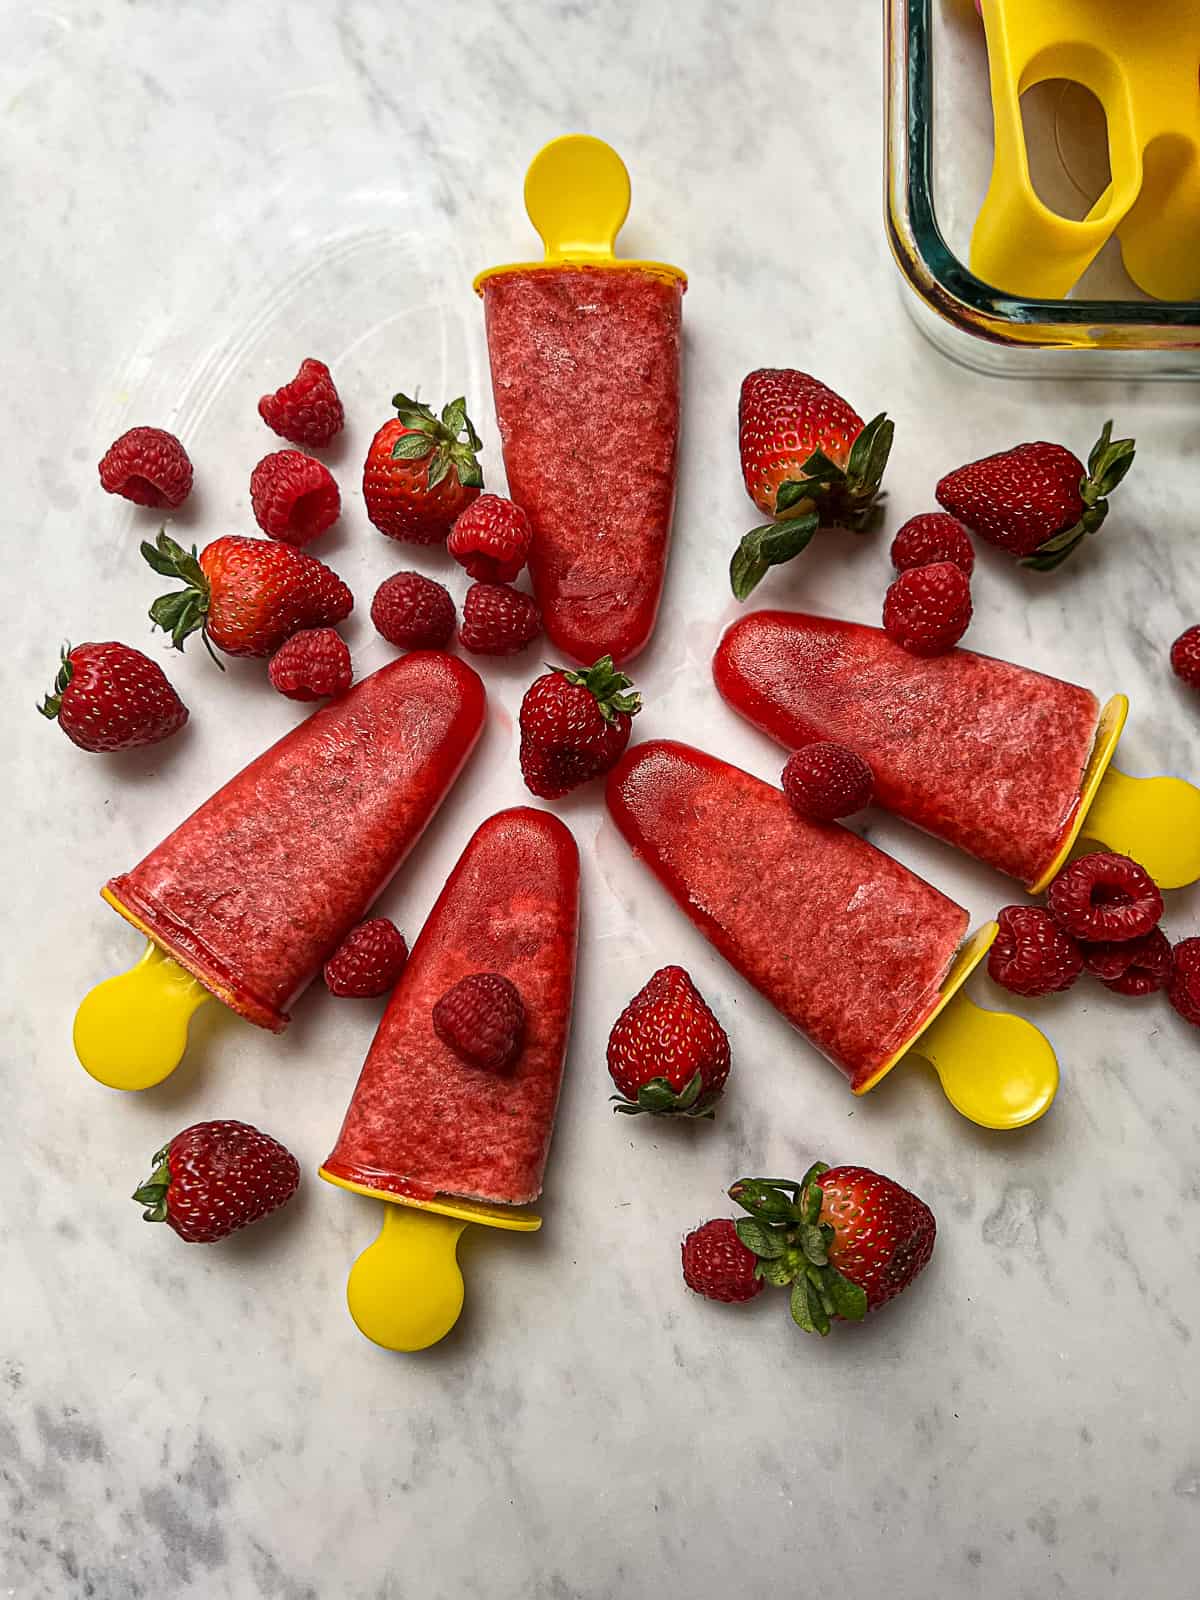 Easy Homemade Popsicles With Fresh Berries 